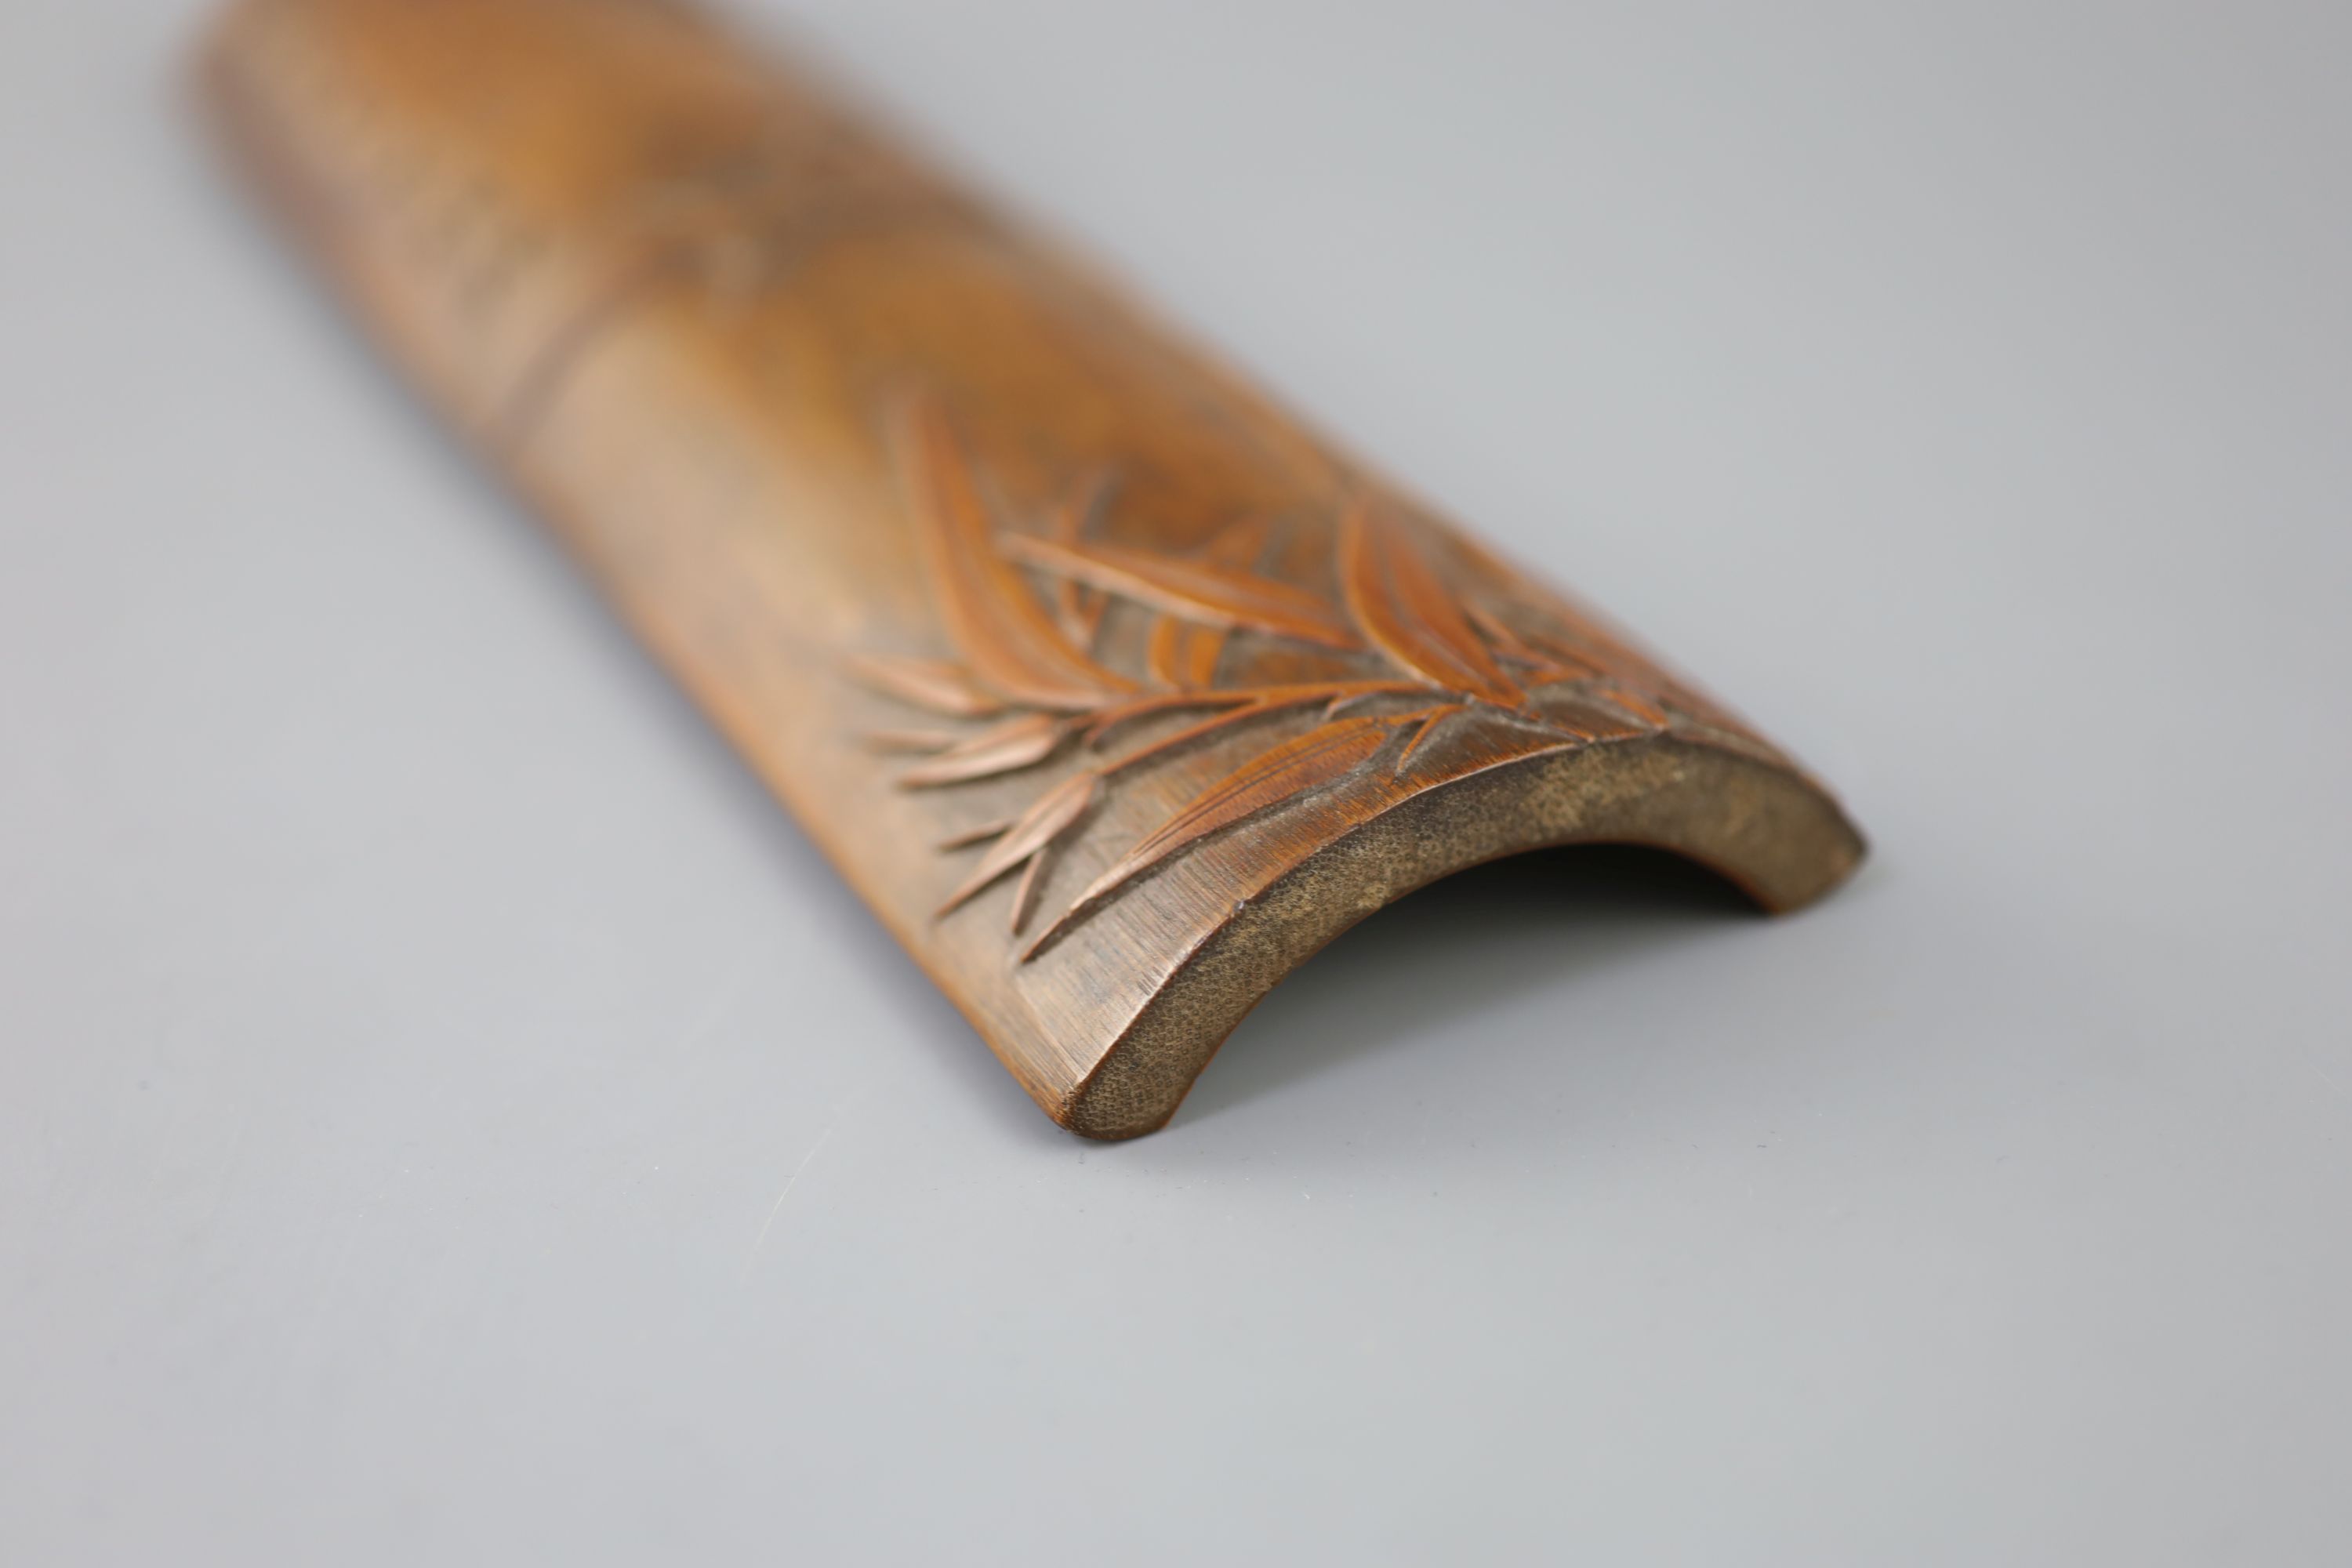 A Chinese bamboo bamboo sprig wrist rest, 18th century,